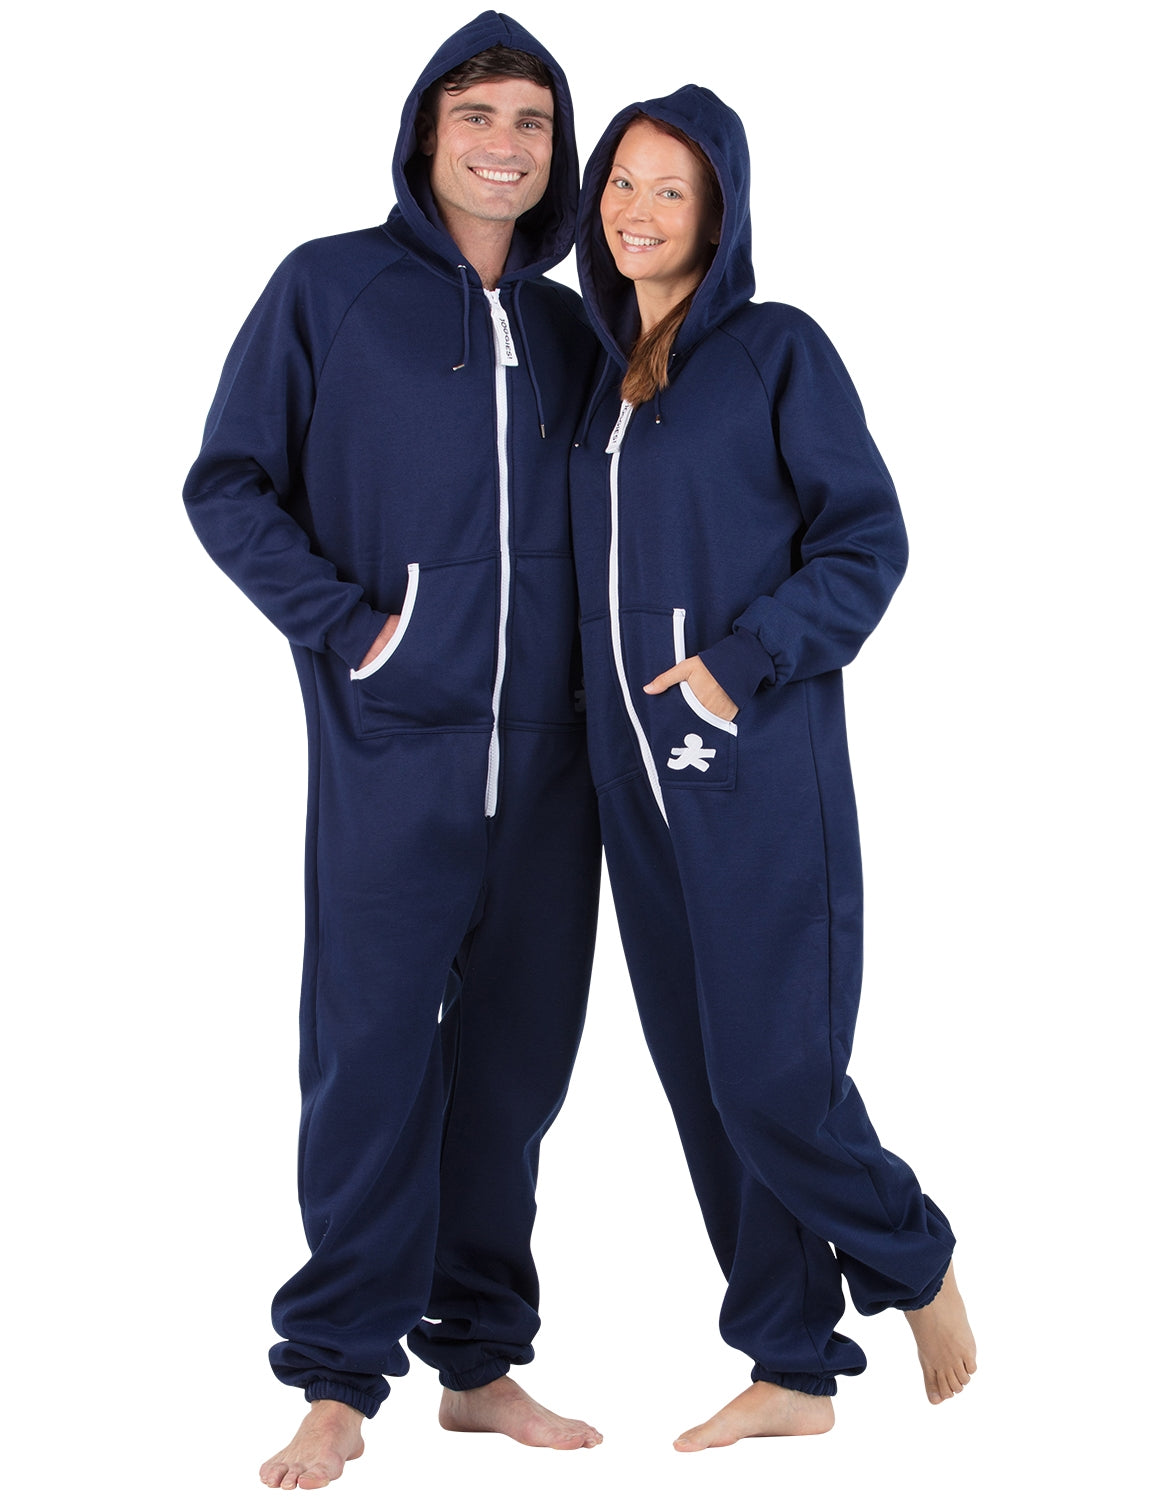 Footed Pajamas - Brilliant Blue Adult Hoodie Fleece Onesie - Adult - Small2X/Dbl Wide (Fits 5'3 - 5'6)